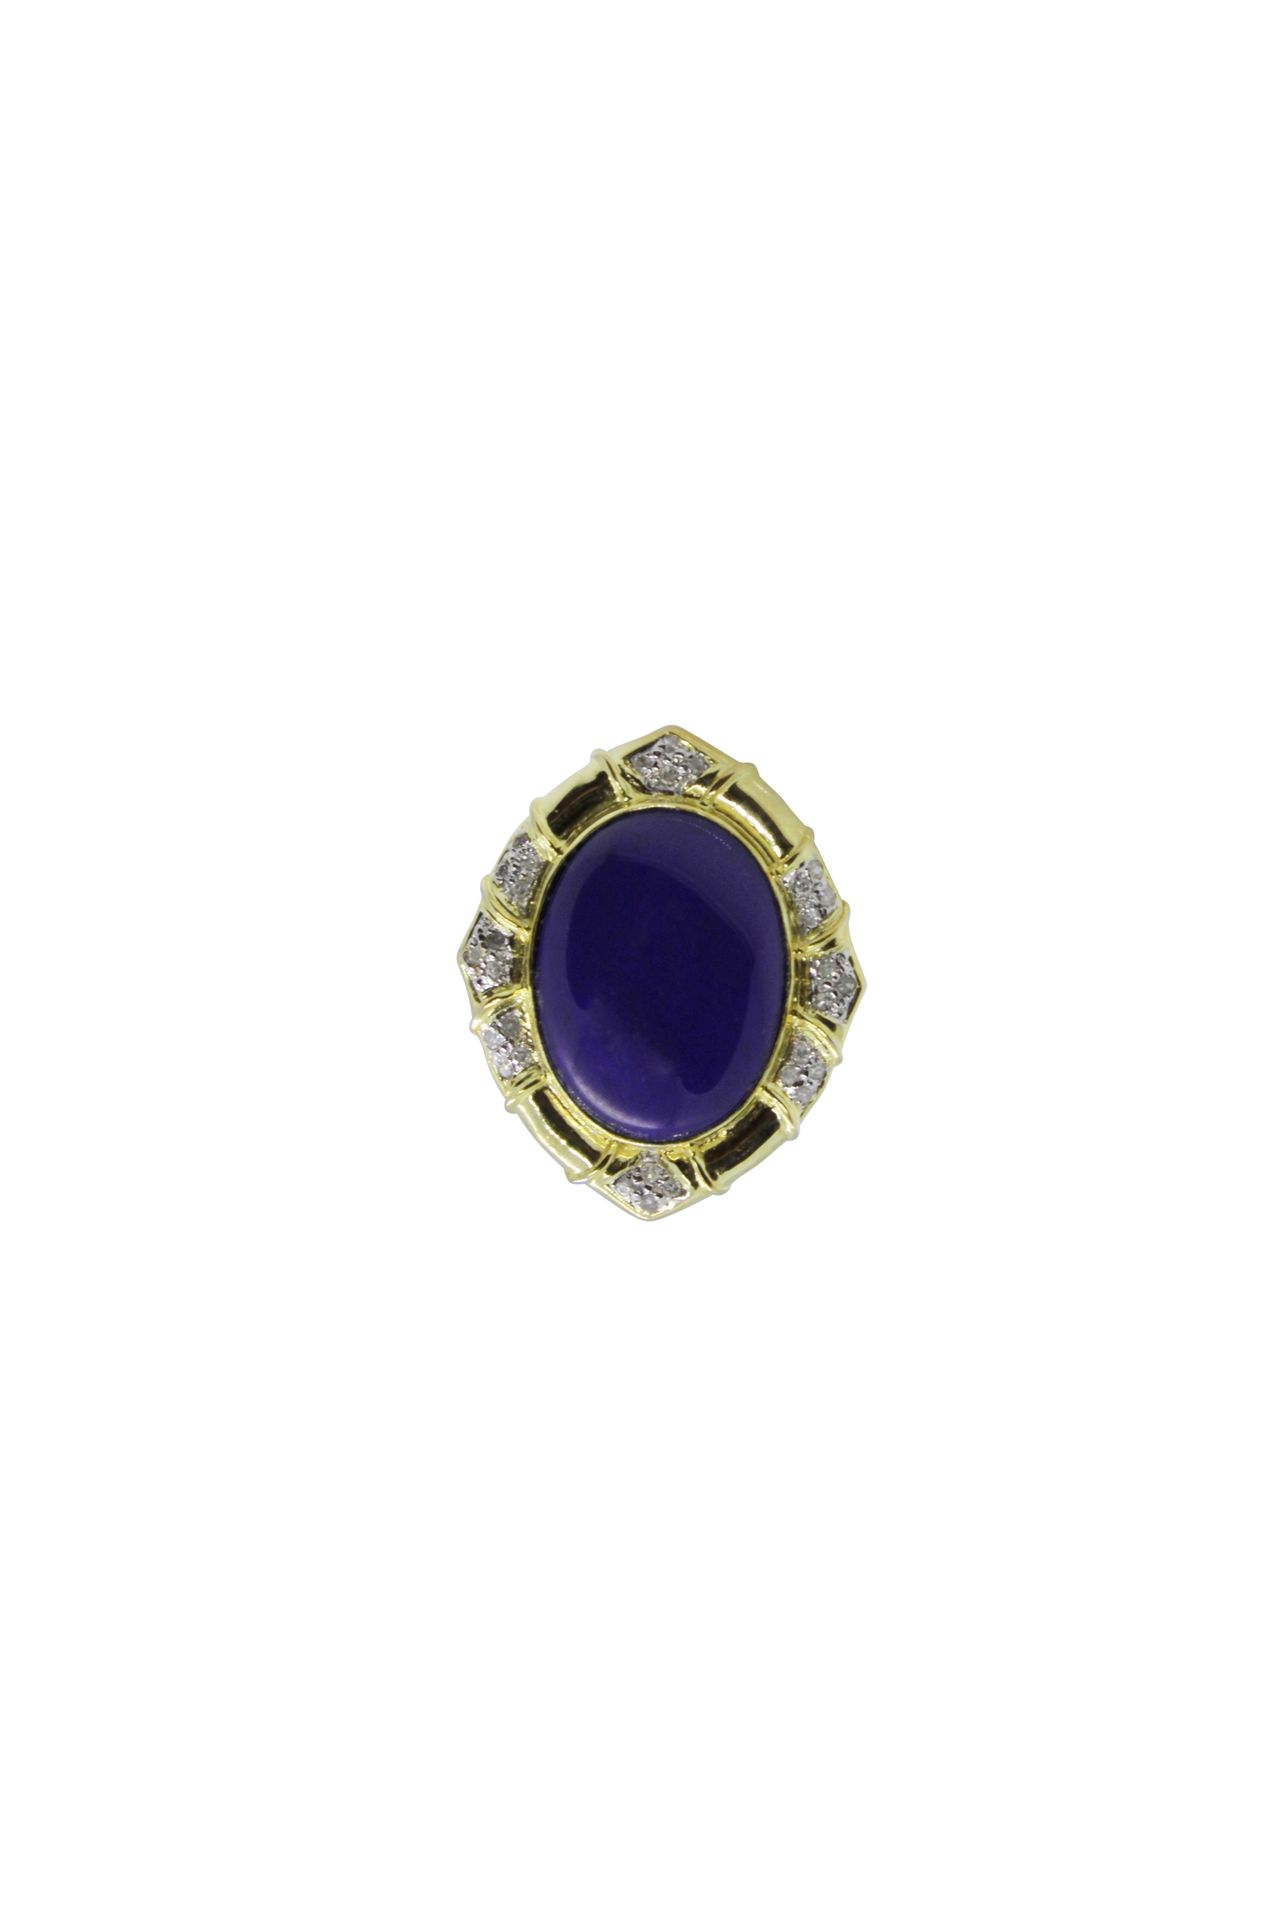 14k gold ring with lapis and diamonds 14k gold ring with lapis and diamonds. Gro&hellip;